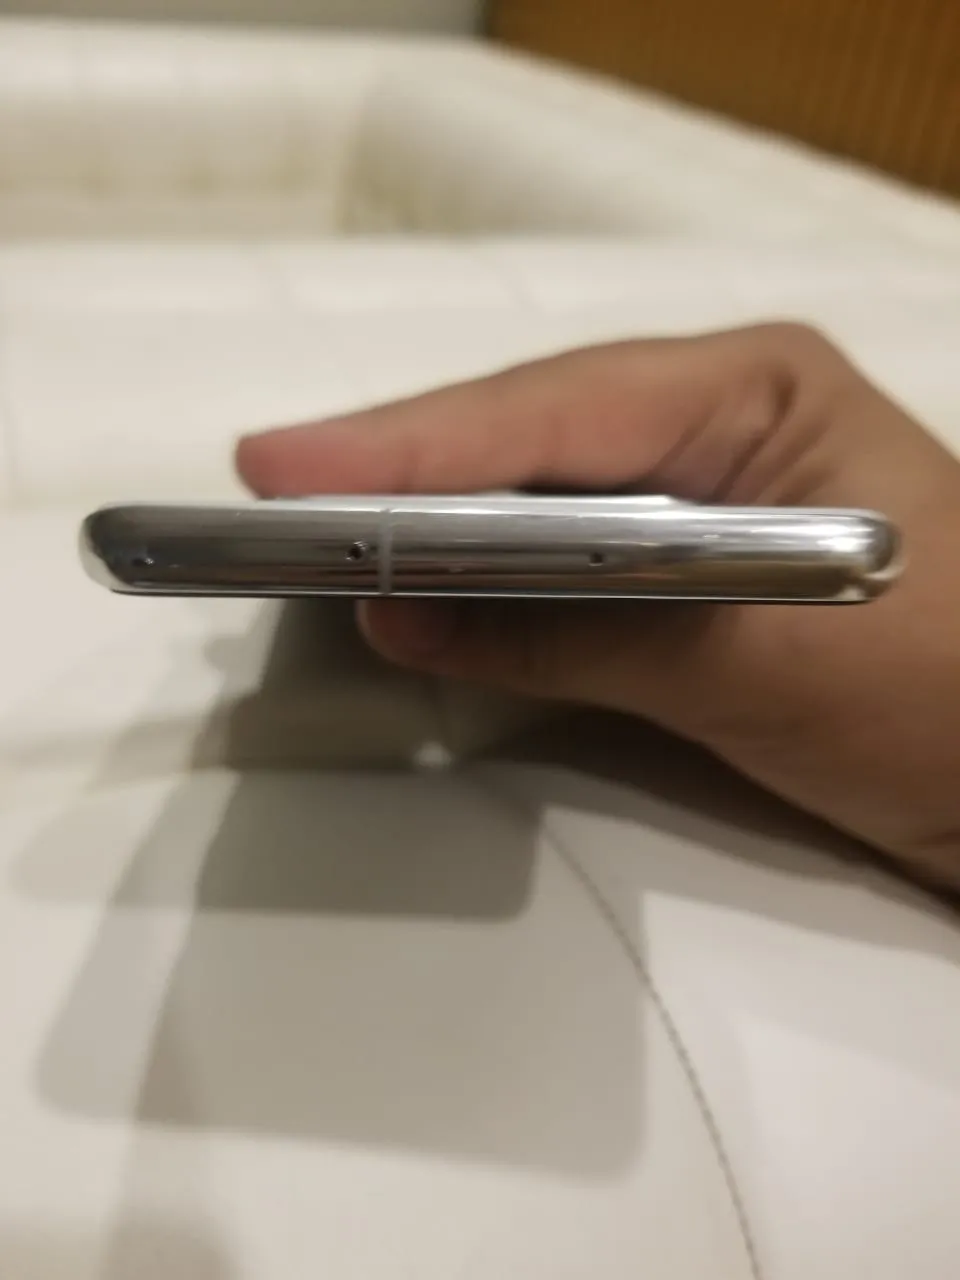 new condition Samsung s10 plus for sale - photo 2